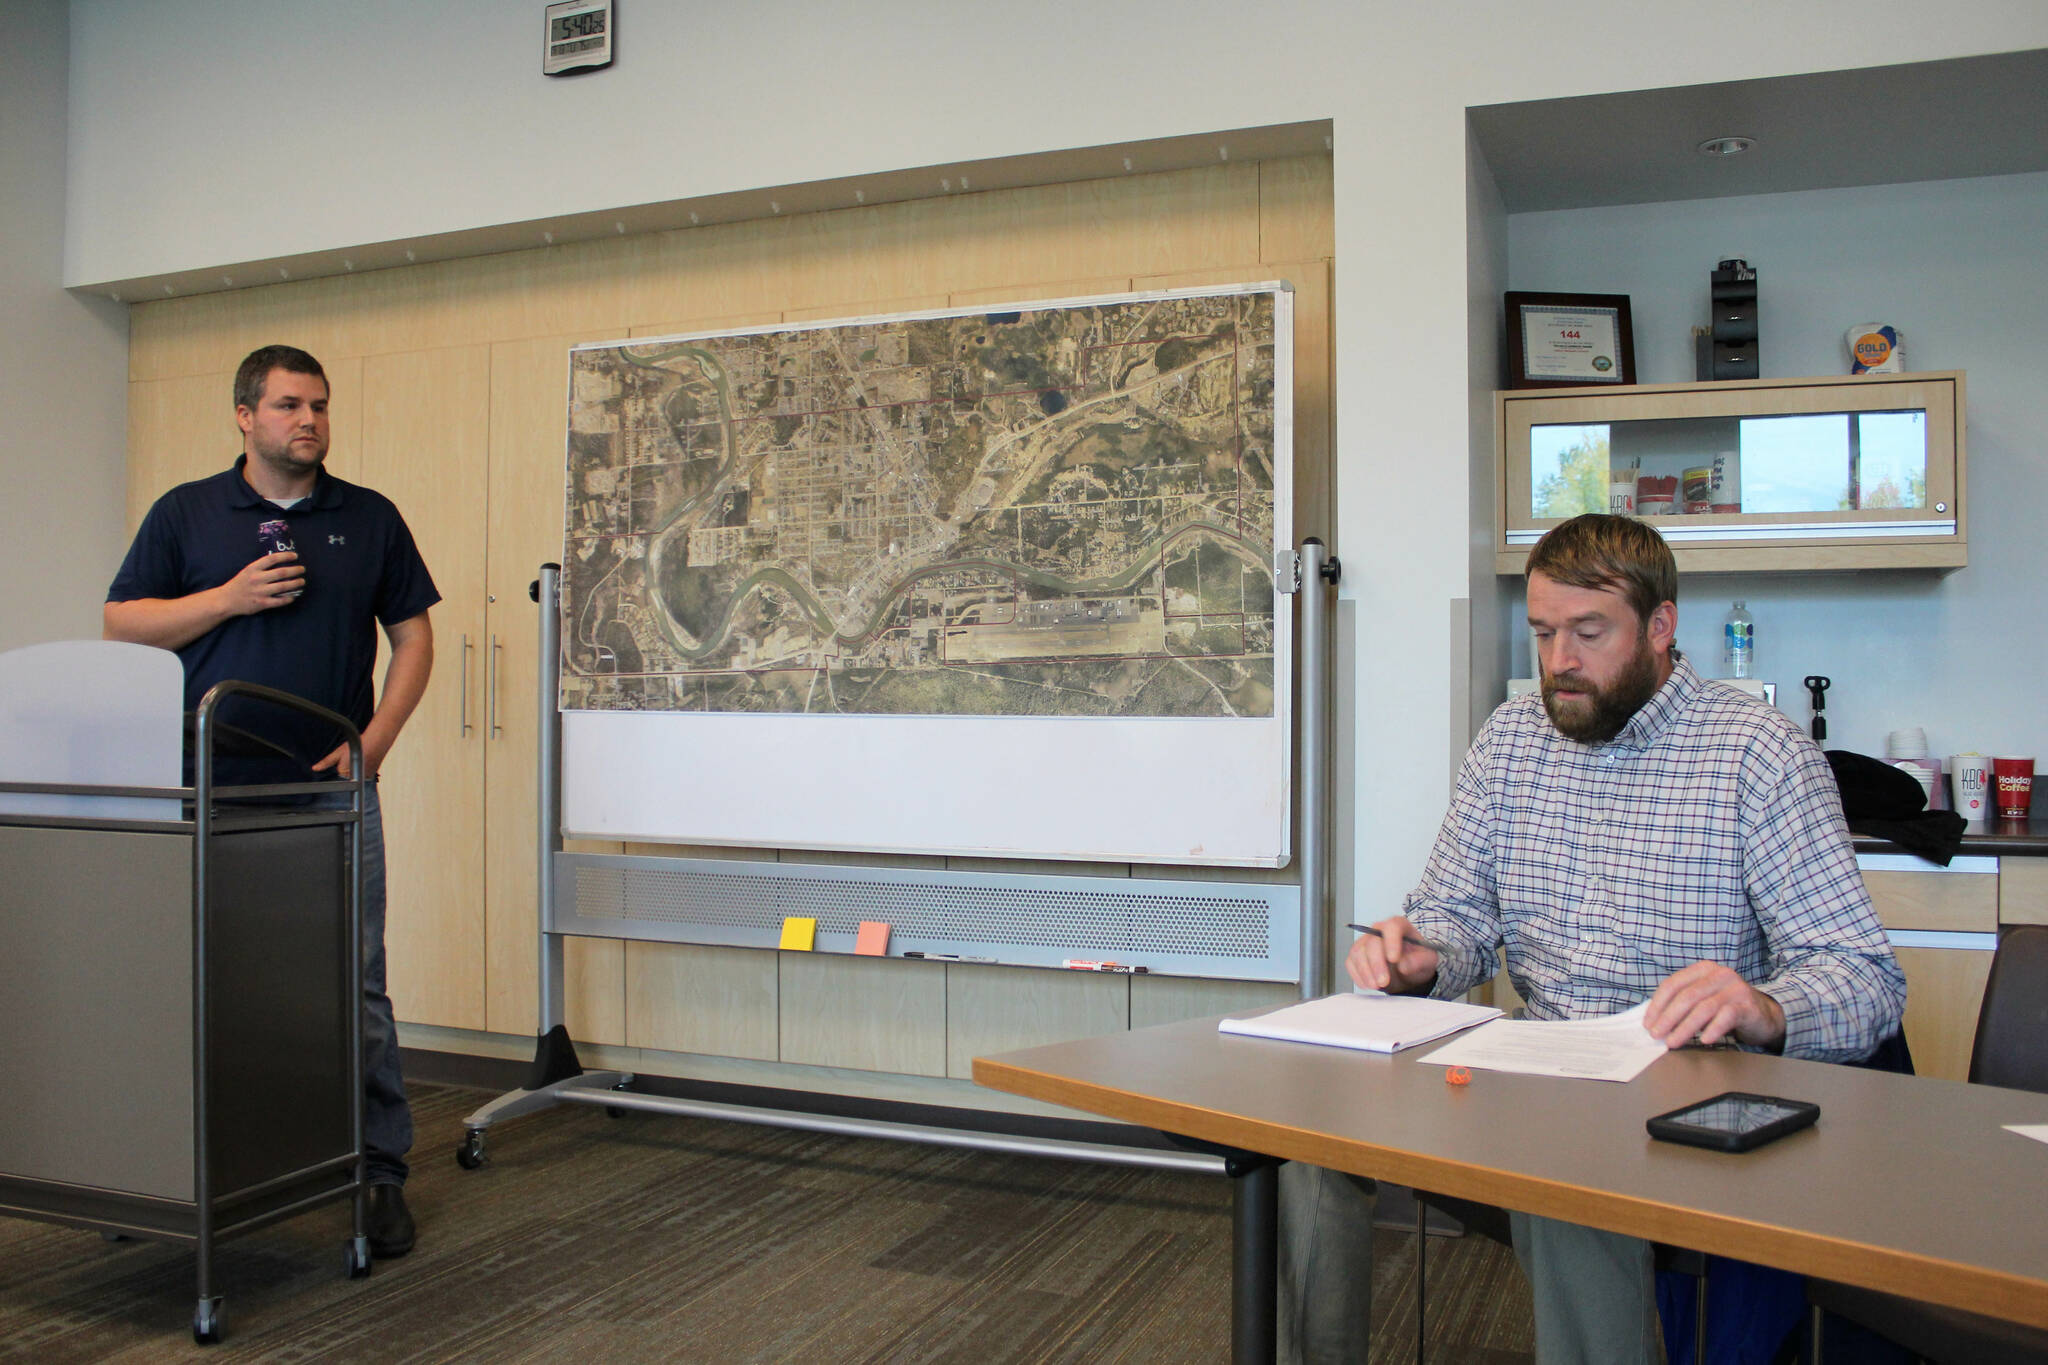 Soldotna Public Works Director Kyle Kornelis (right) answers questions from Jeff Dolifka (left) regarding the Soldotna Field House on Tuesday, Sept. 13, 2022, in Soldotna, Alaska. (Ashlyn O’Hara/Peninsula Clarion)